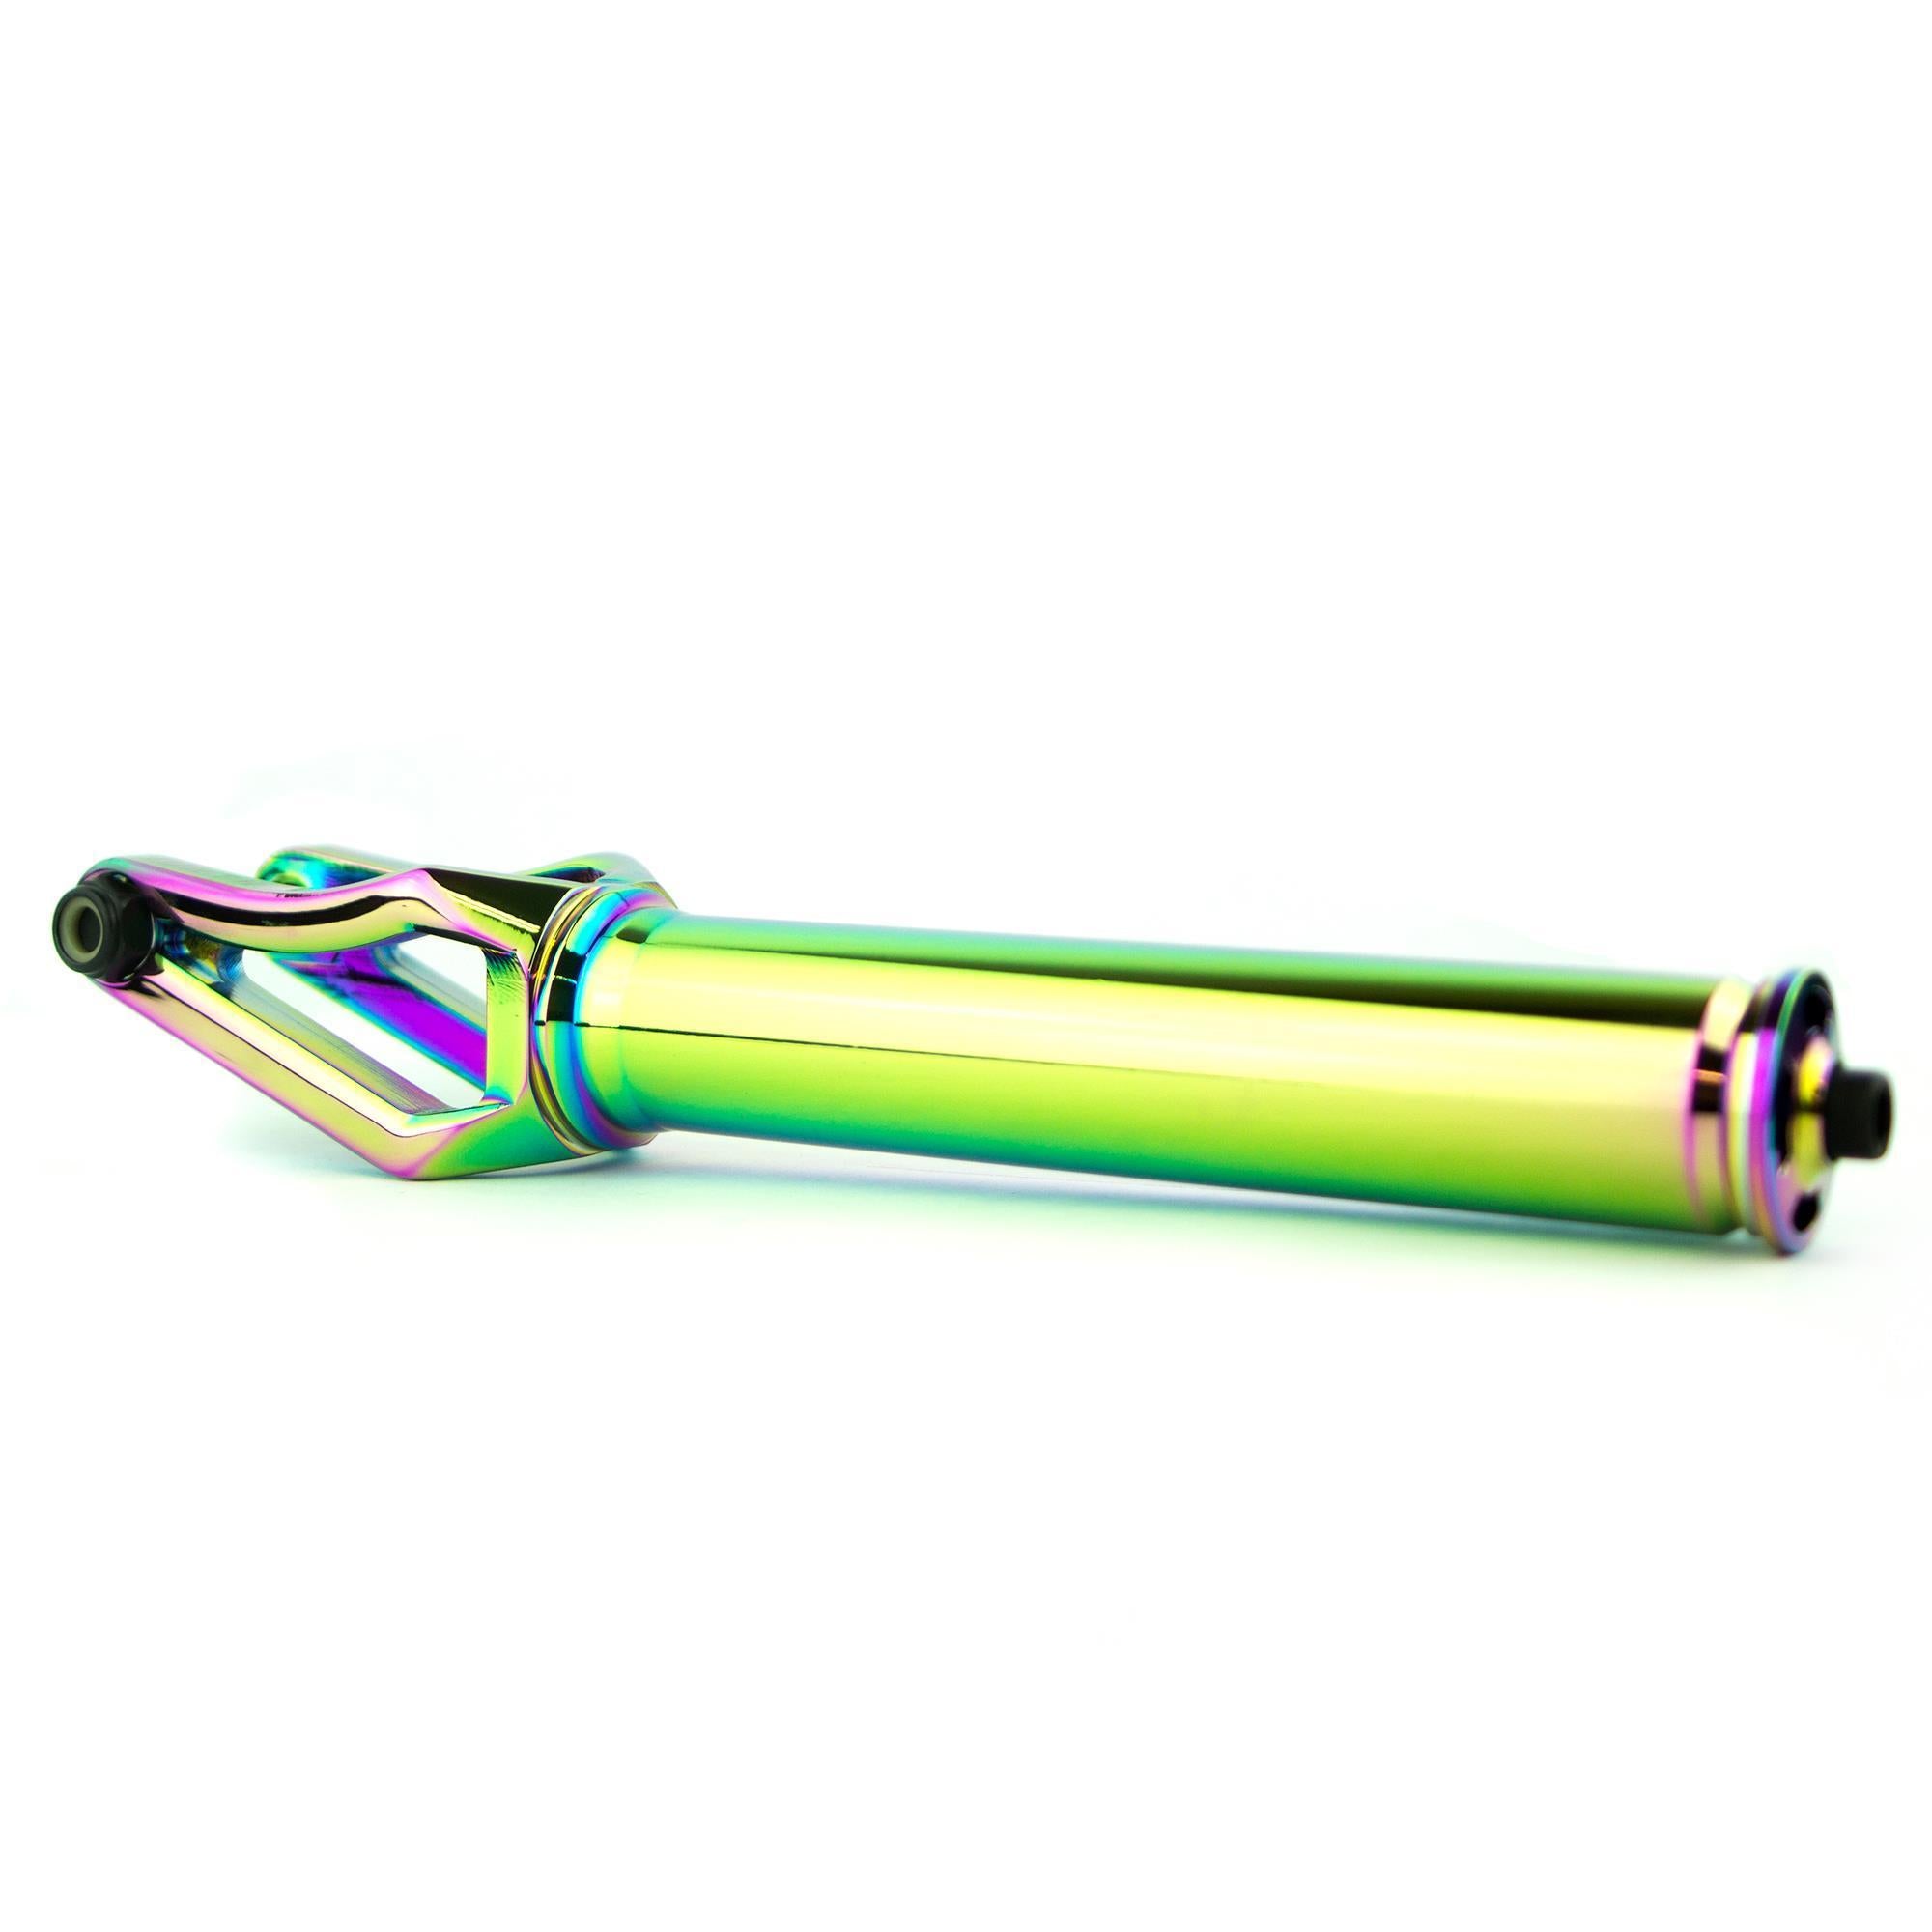 North Scooters Peacemaker - Scooter Fork Oilslick